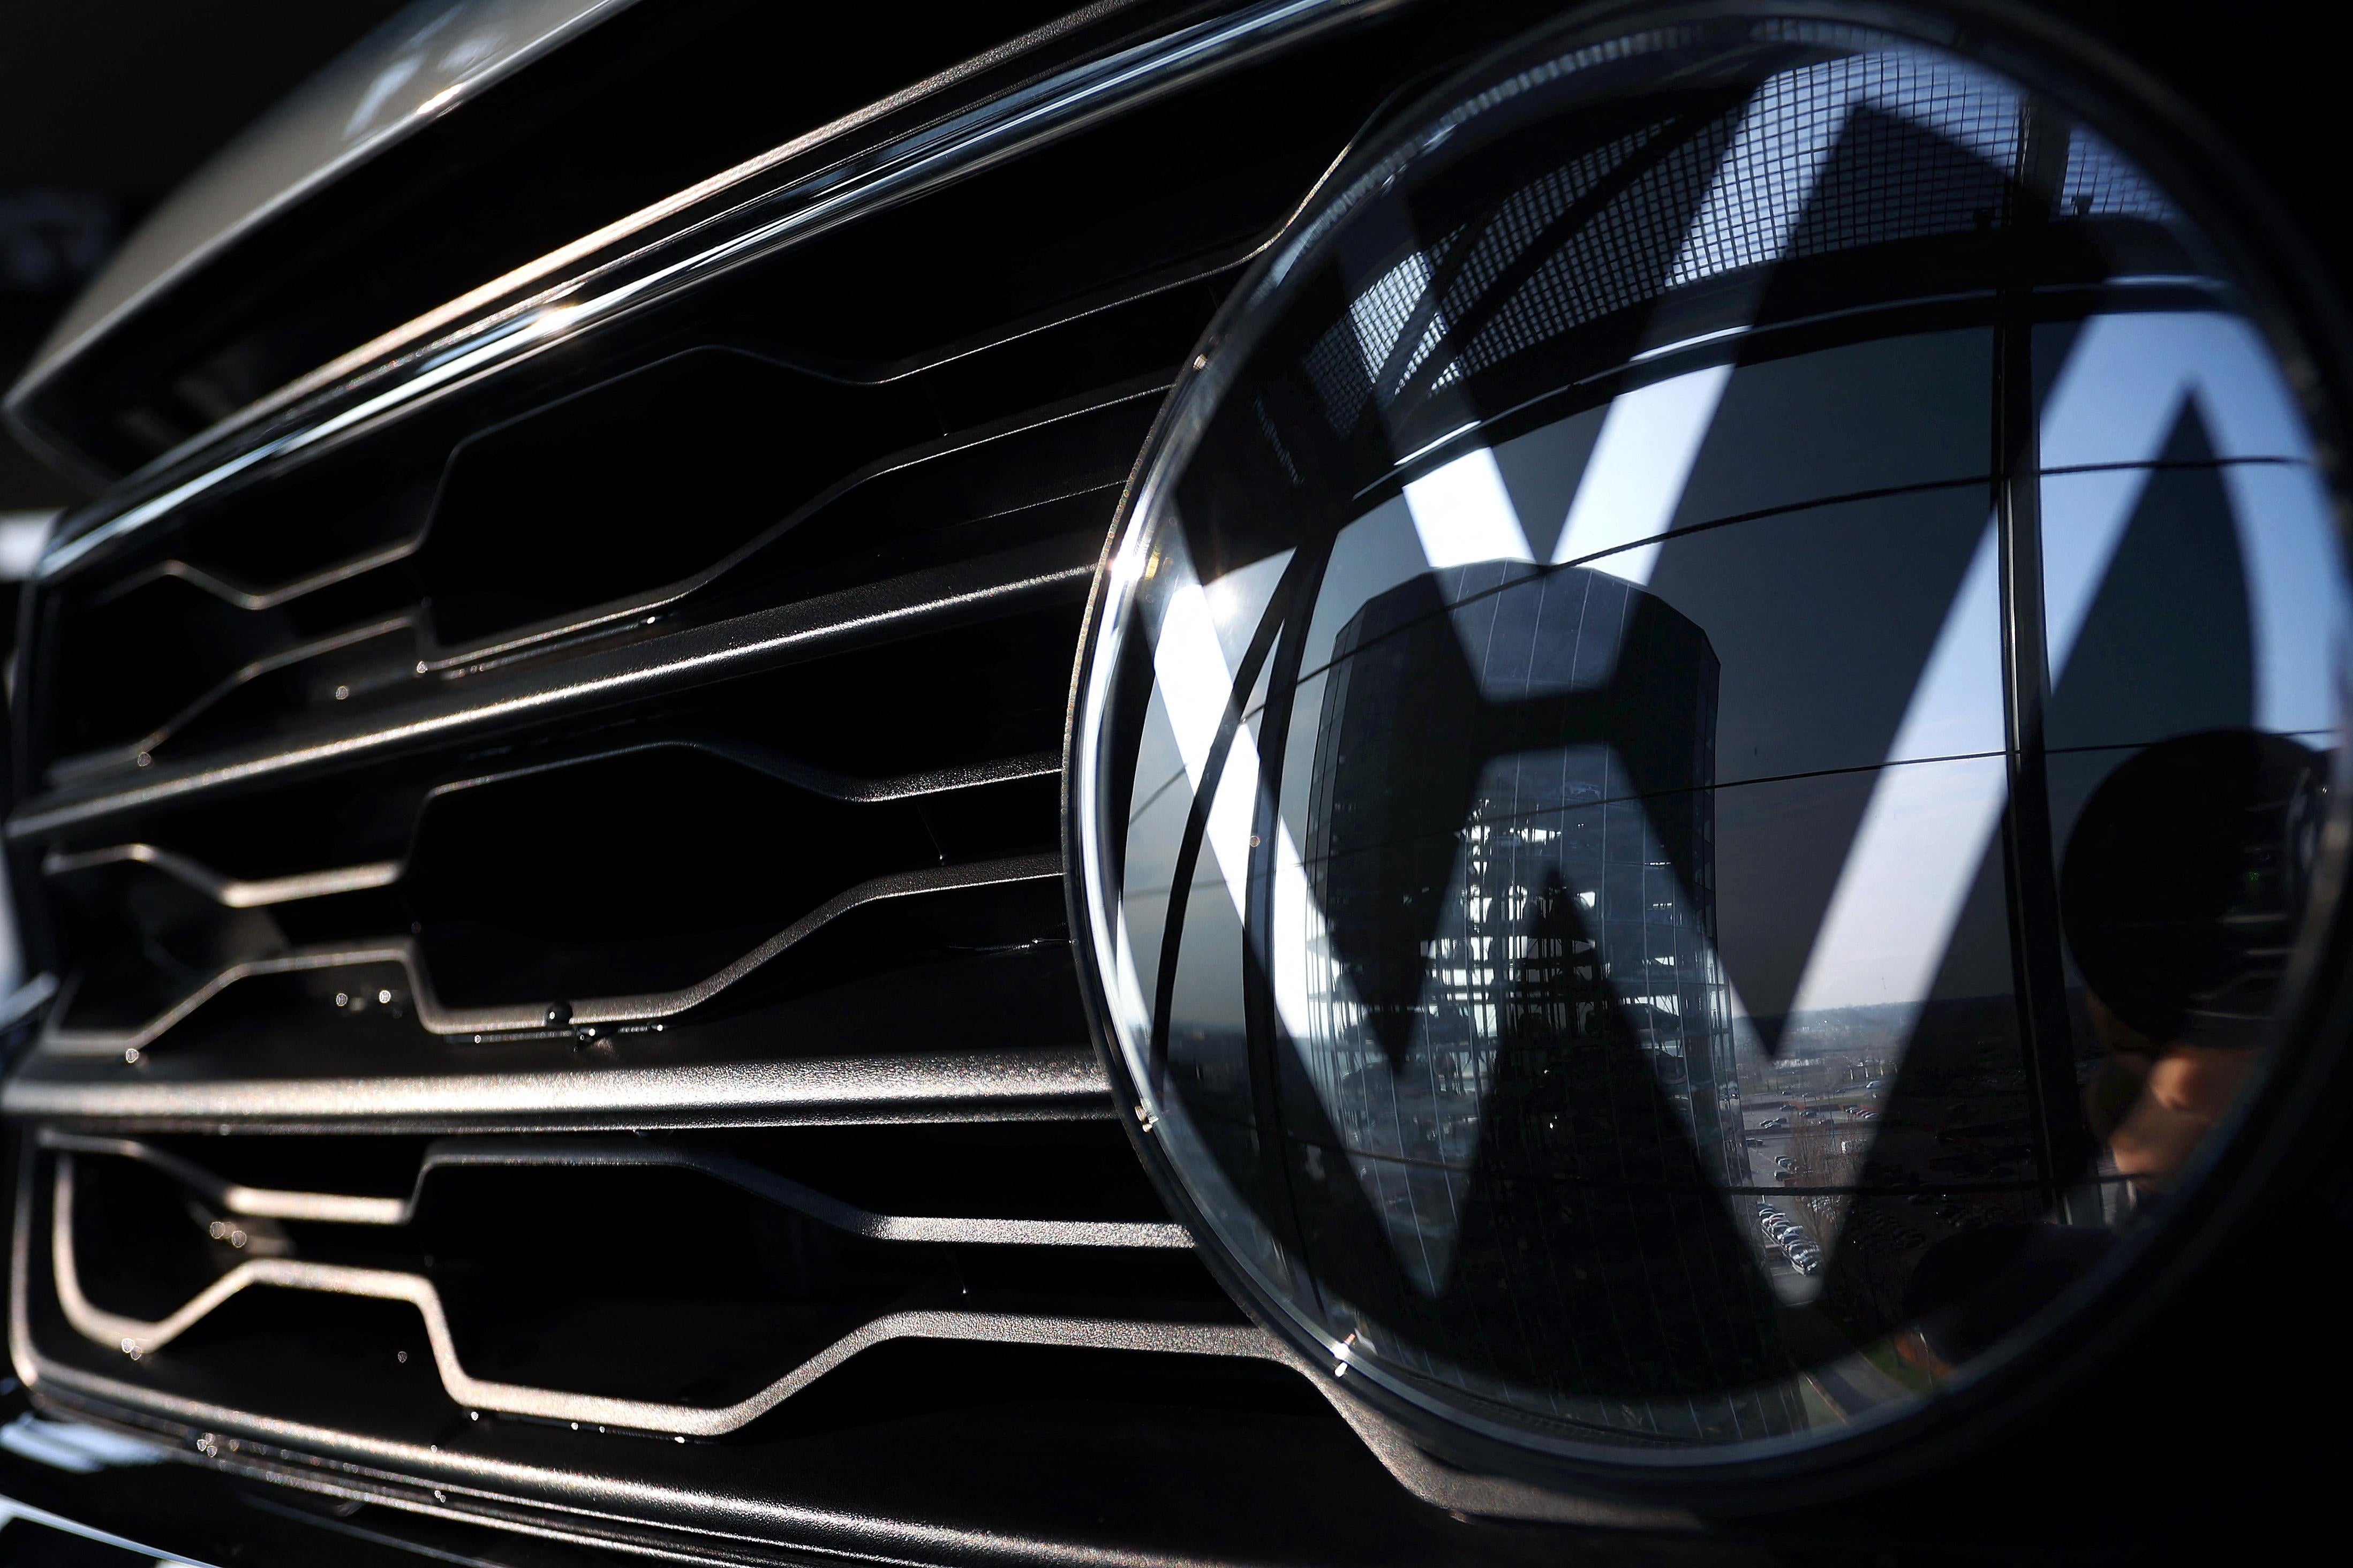 A VW logo reflecting a building is seen on the grille of a car.